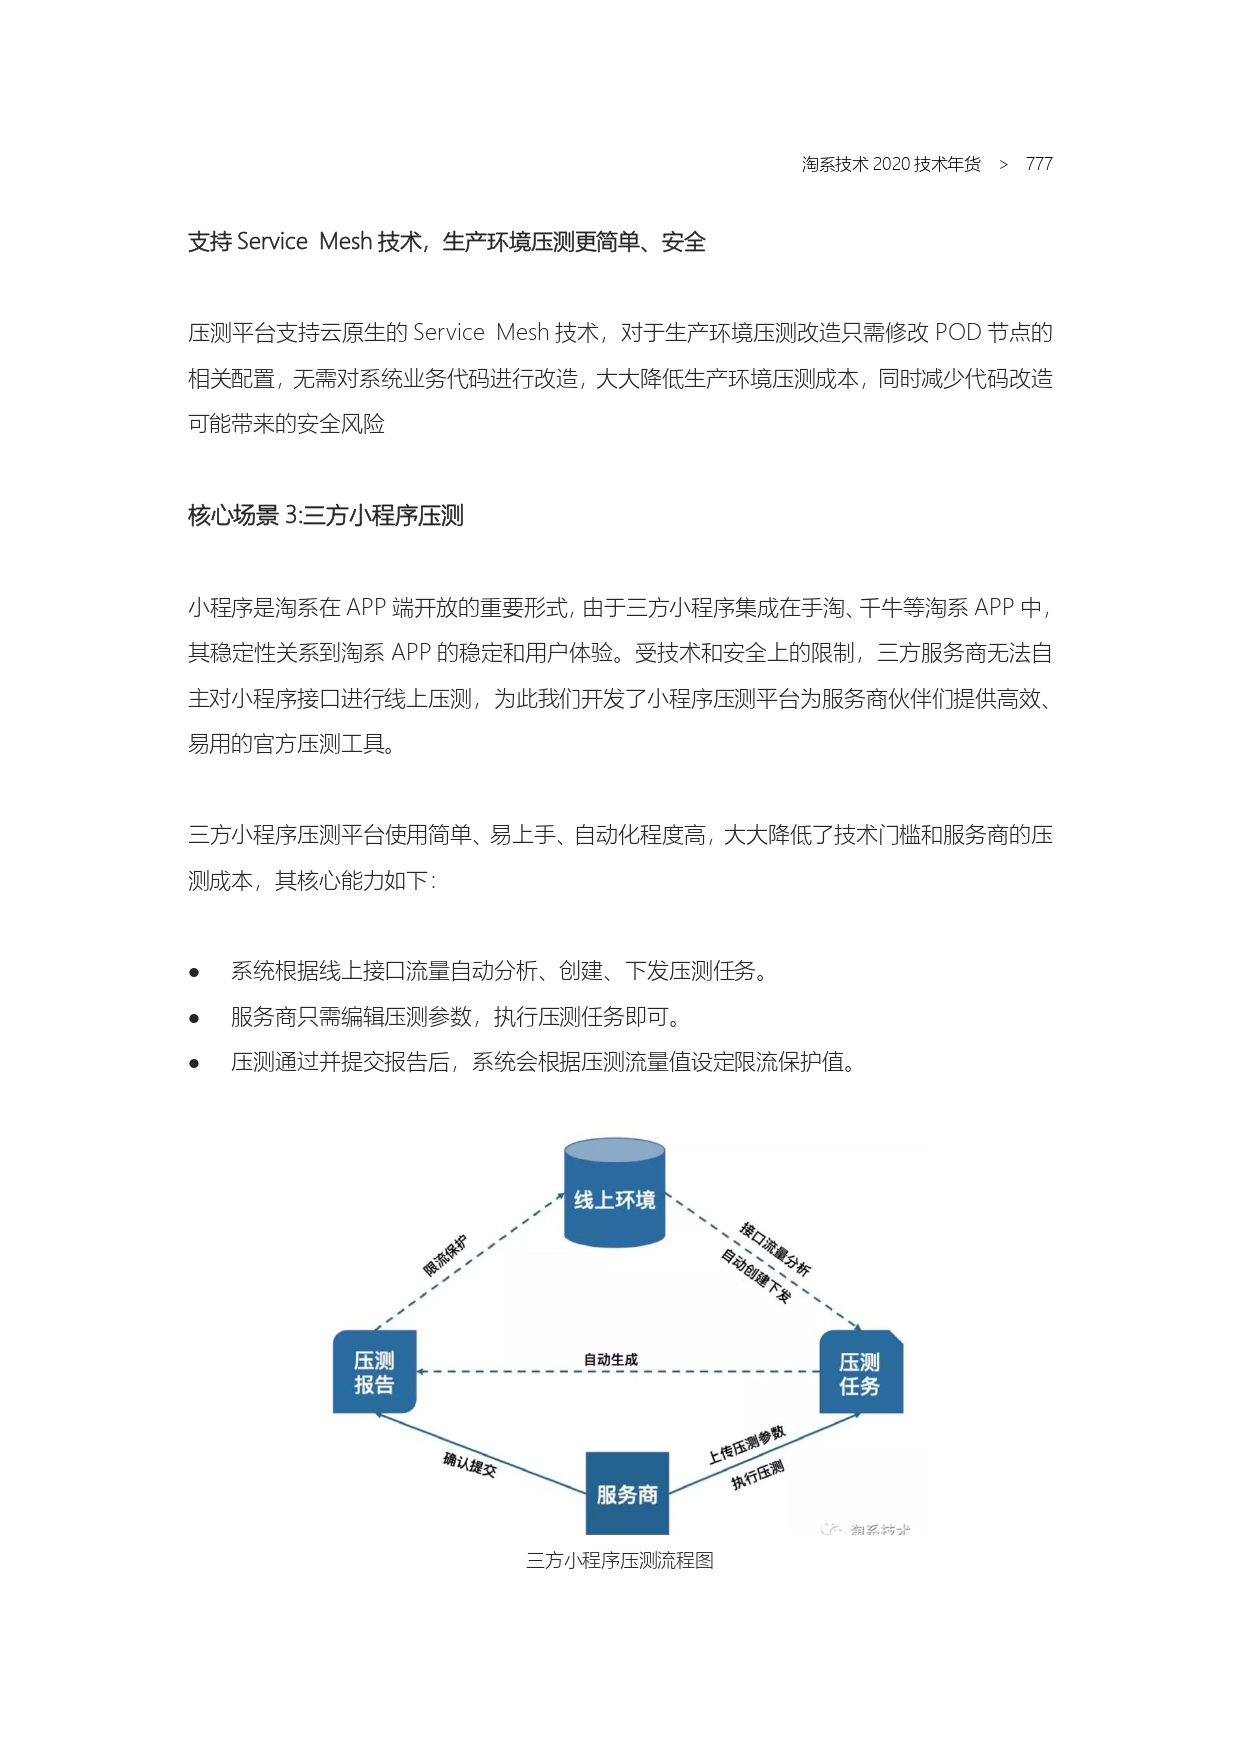 The Complete Works of Tao Technology 2020-571-1189-1-300_page-0207.jpg